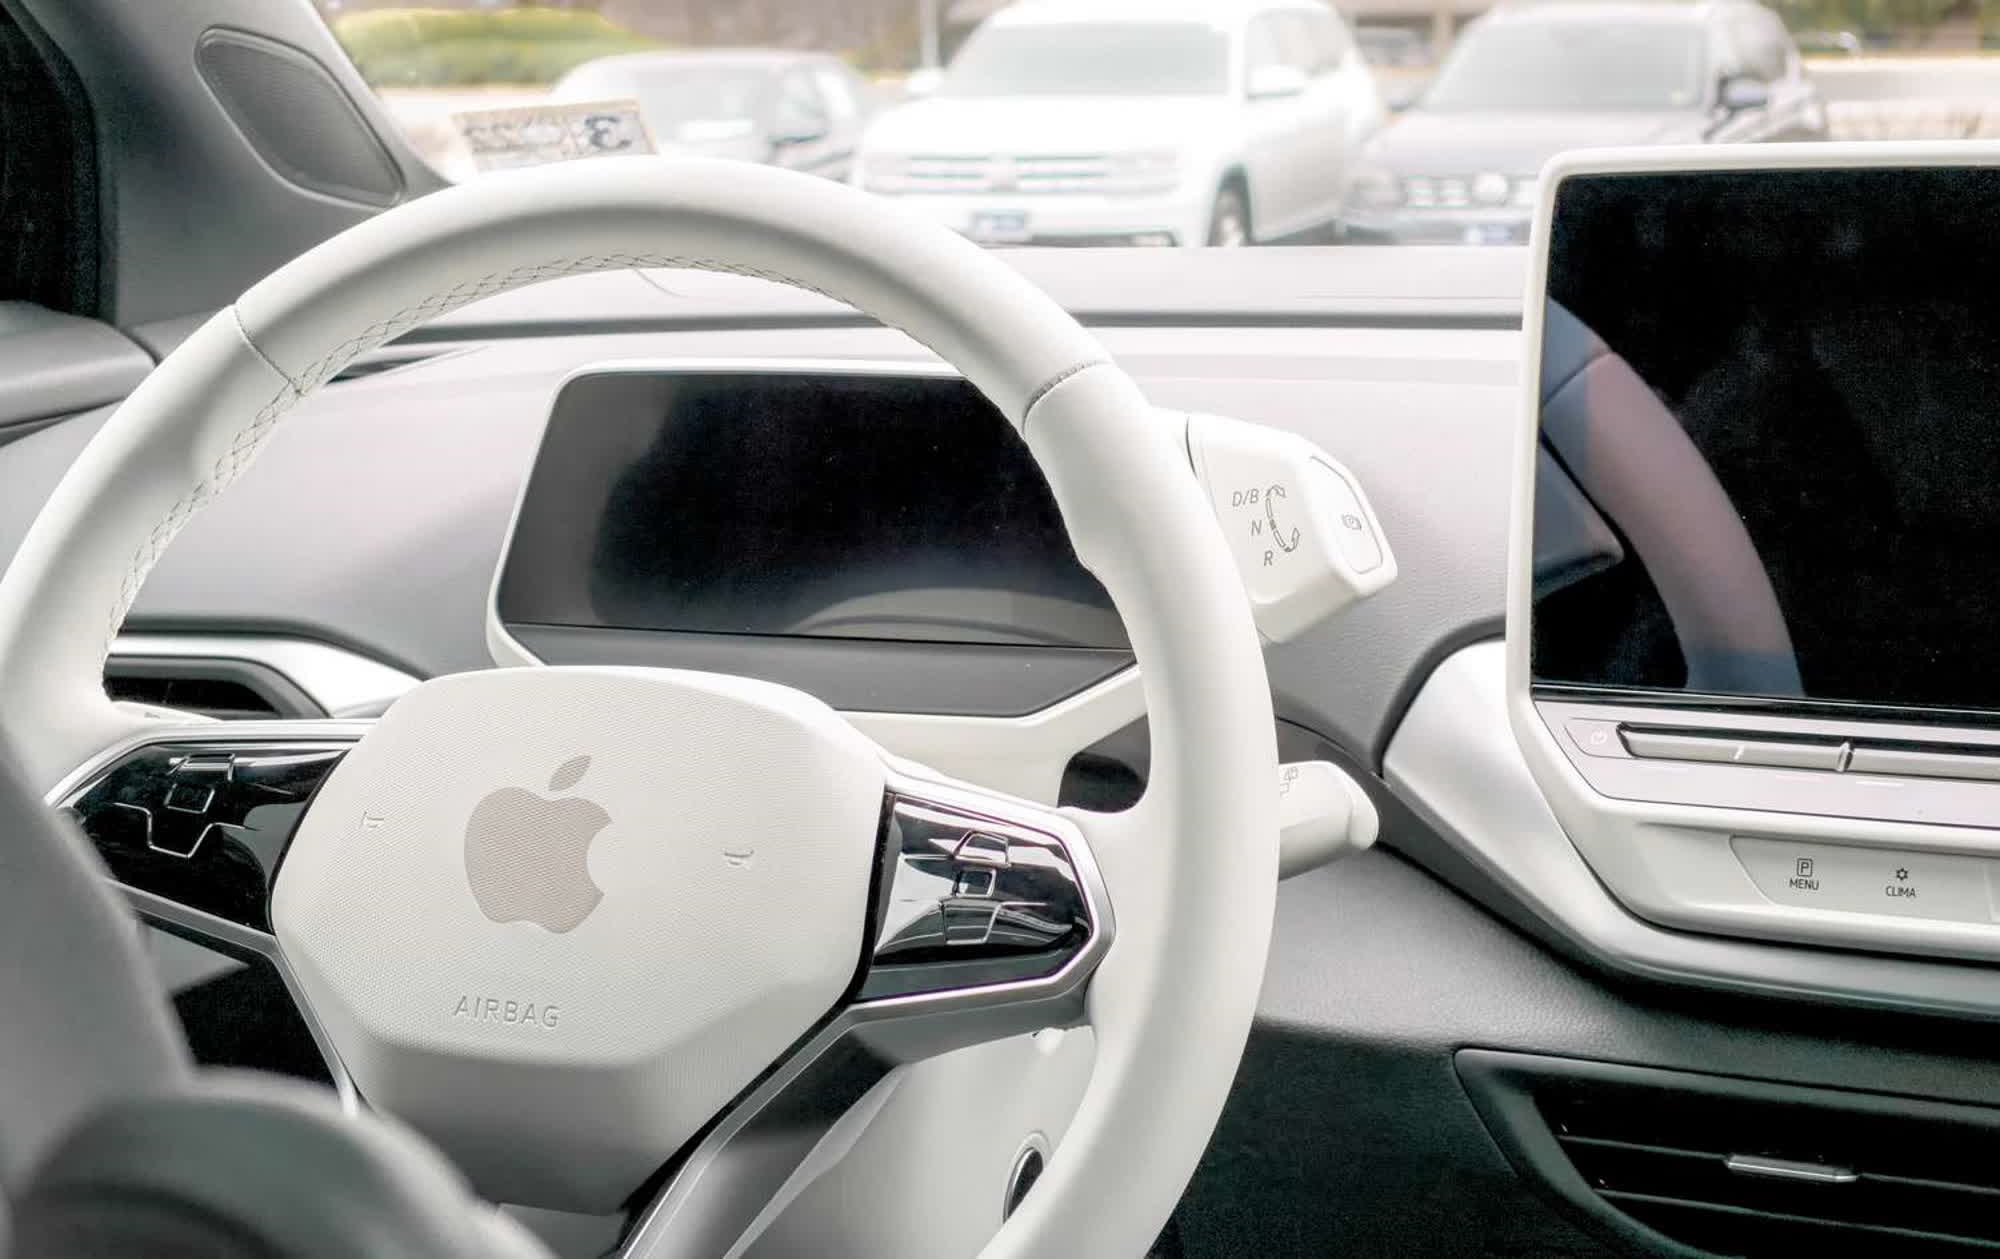 A former Apple engineer stole autonomous driving secrets and sold them to China, the DoJ says